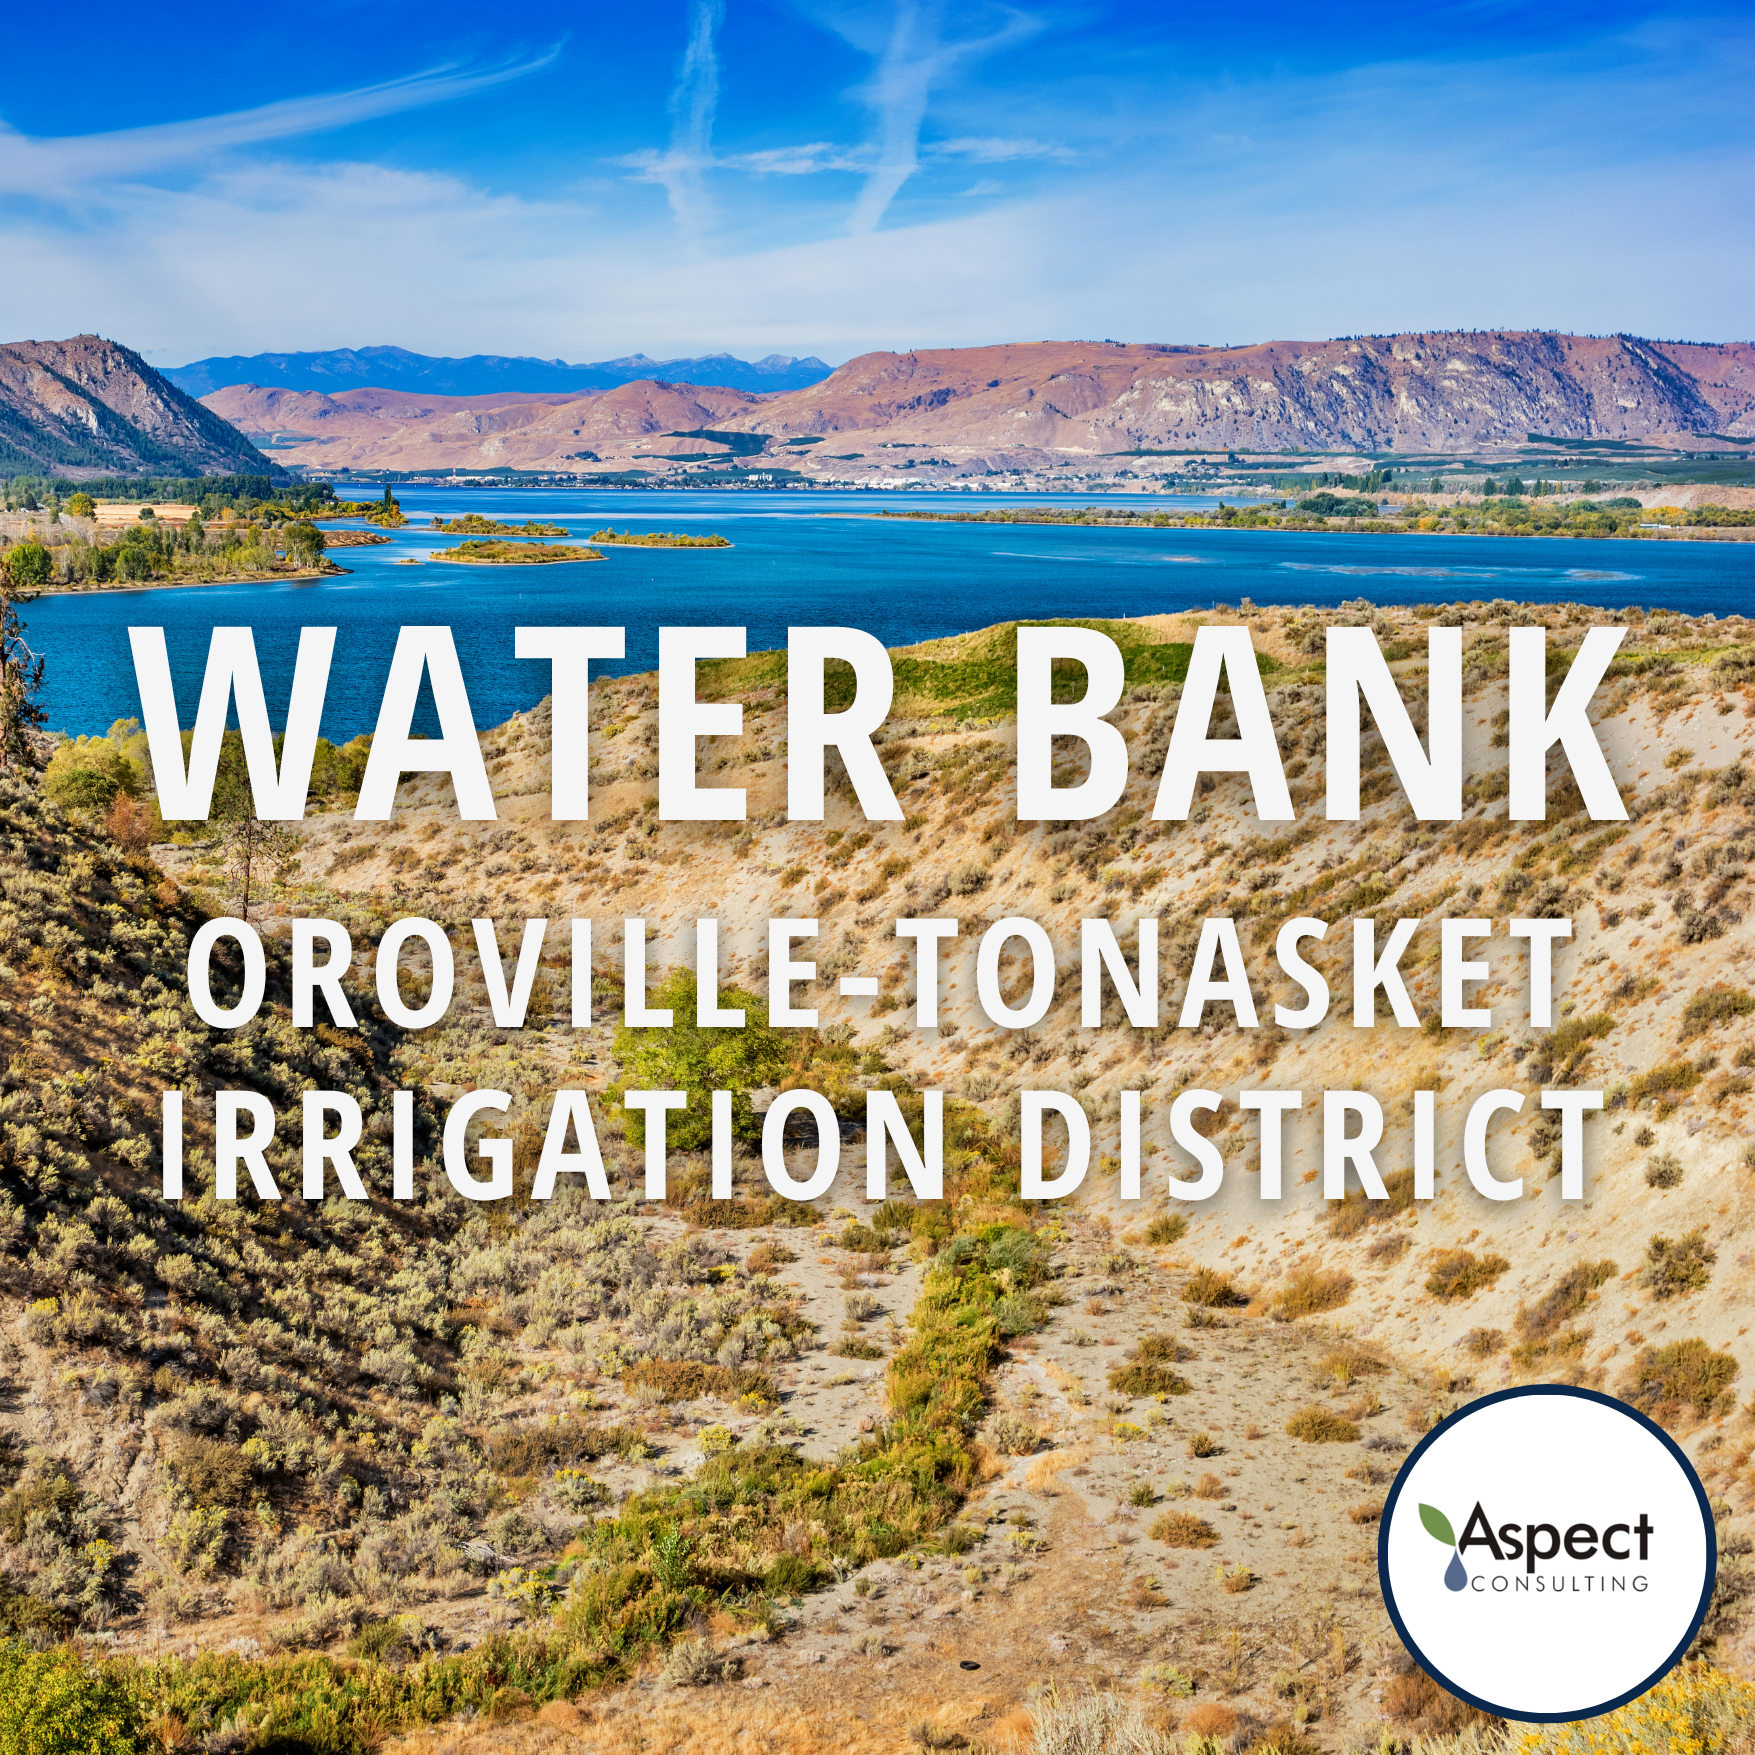 Oroville-Tonasket Irrigation District Water Bank - Aspect Consulting